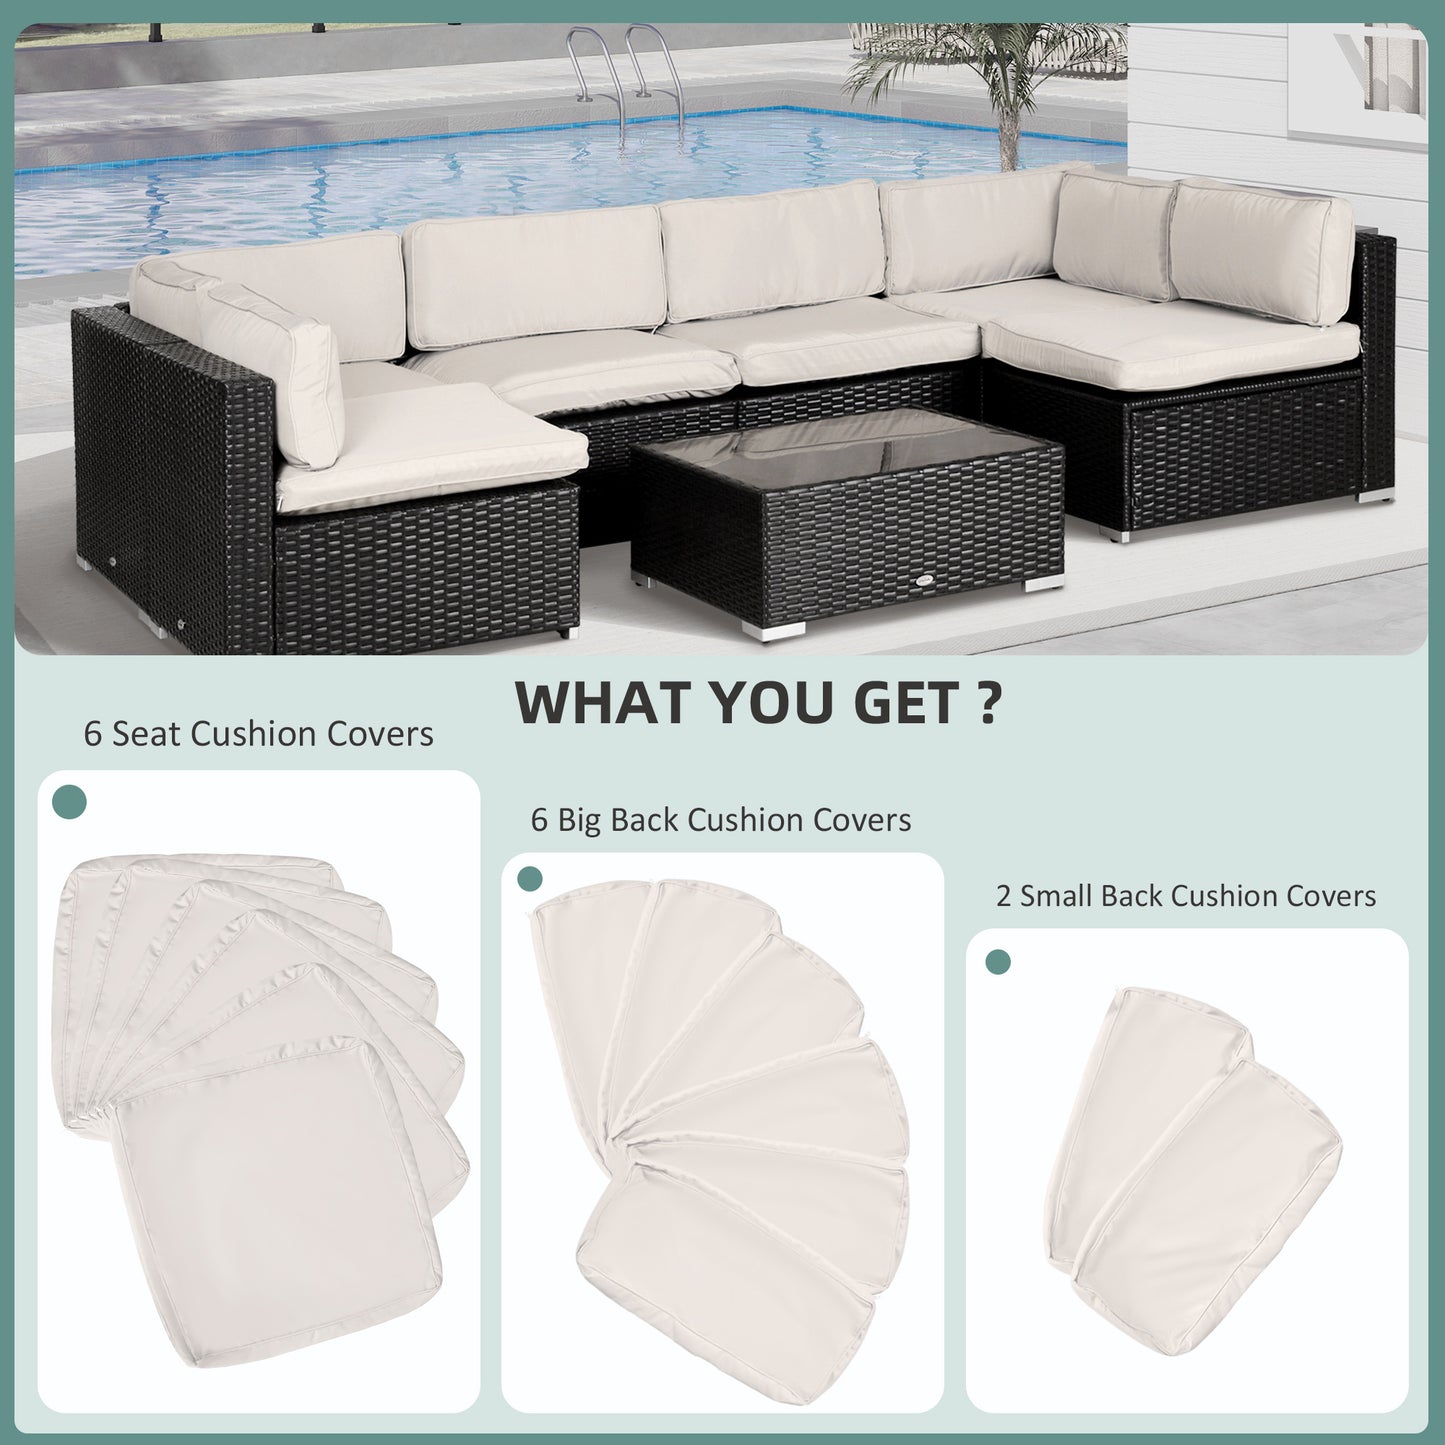 Outdoor 14pc Patio Rattan Sofa Set Cushion Polyester Cover Replacement Set - No Cushion Included, Cream White - Gallery Canada